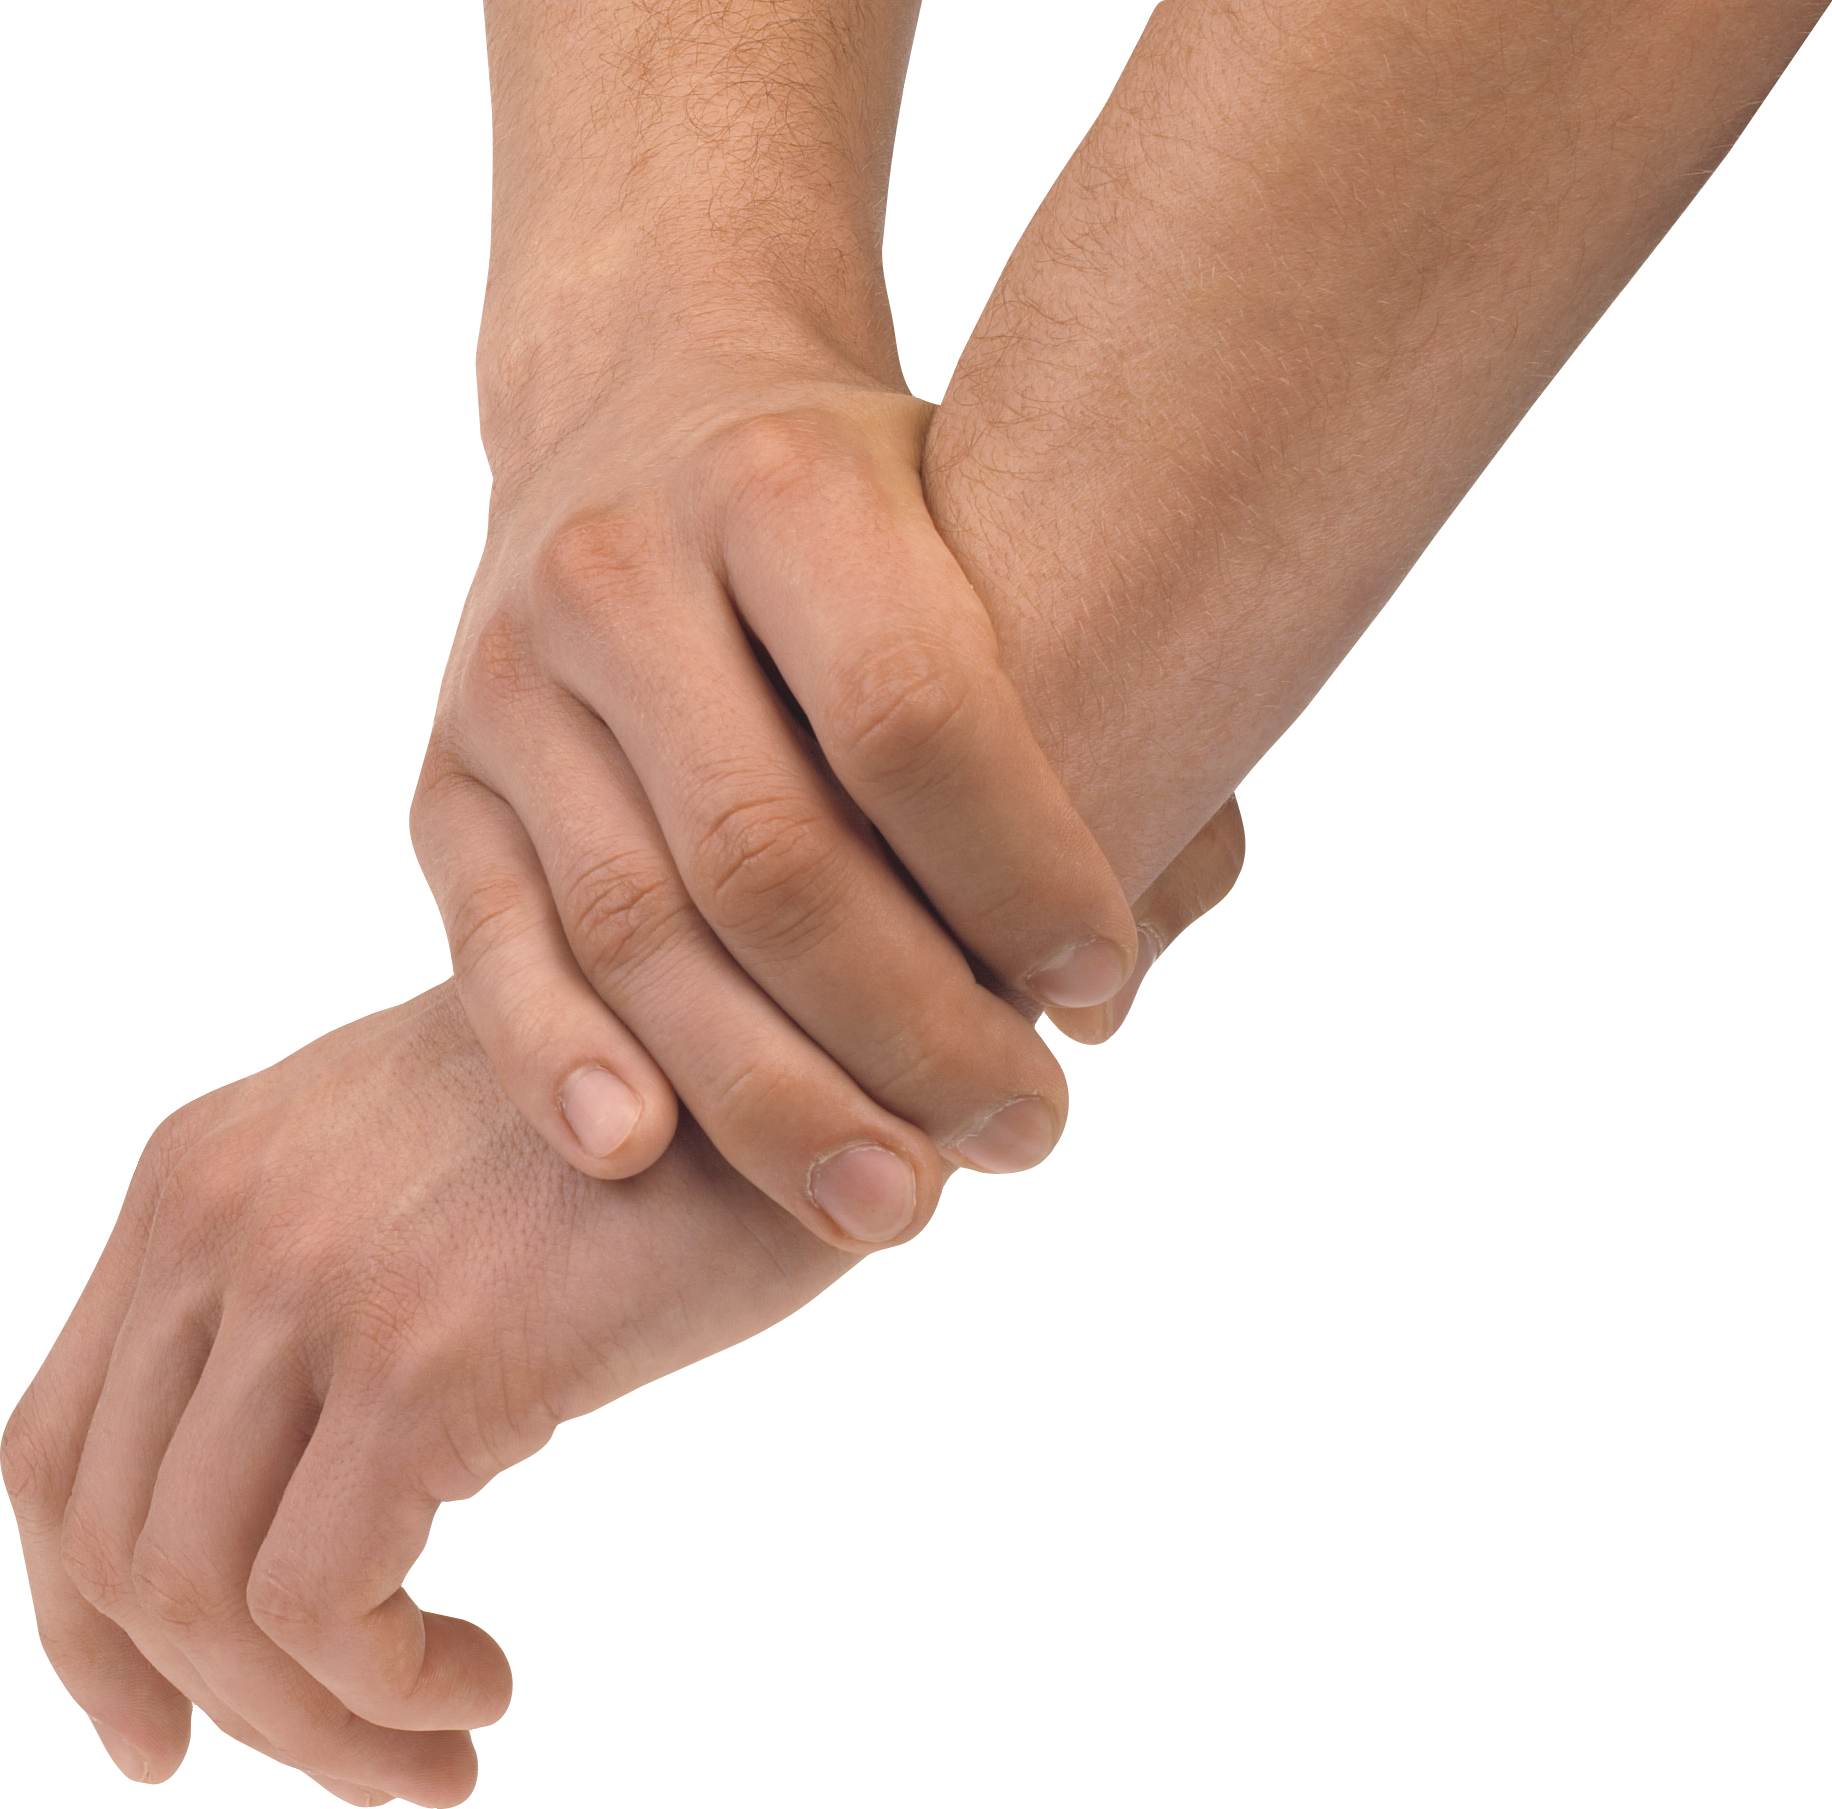 Holding Female Hands Download Free Image PNG Image